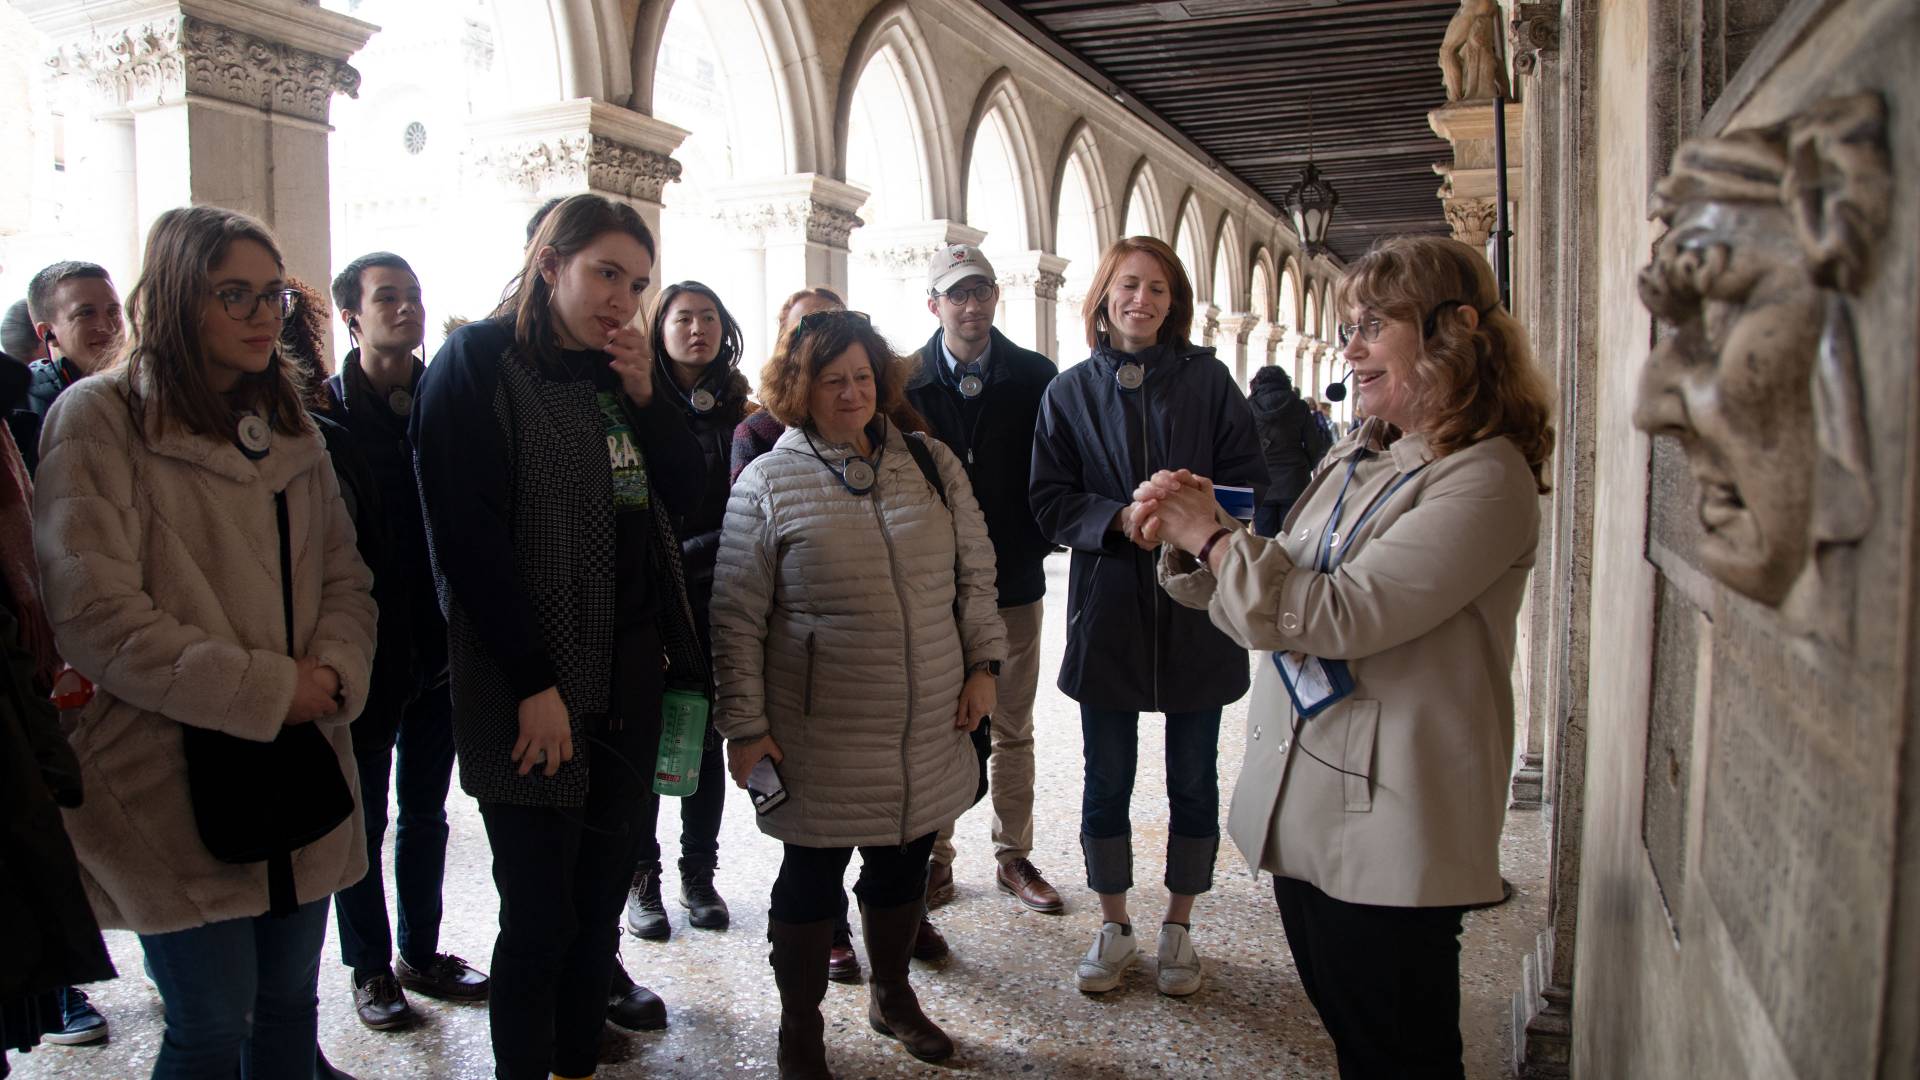 Tour guide with students outside the Doge's Palace in Venice